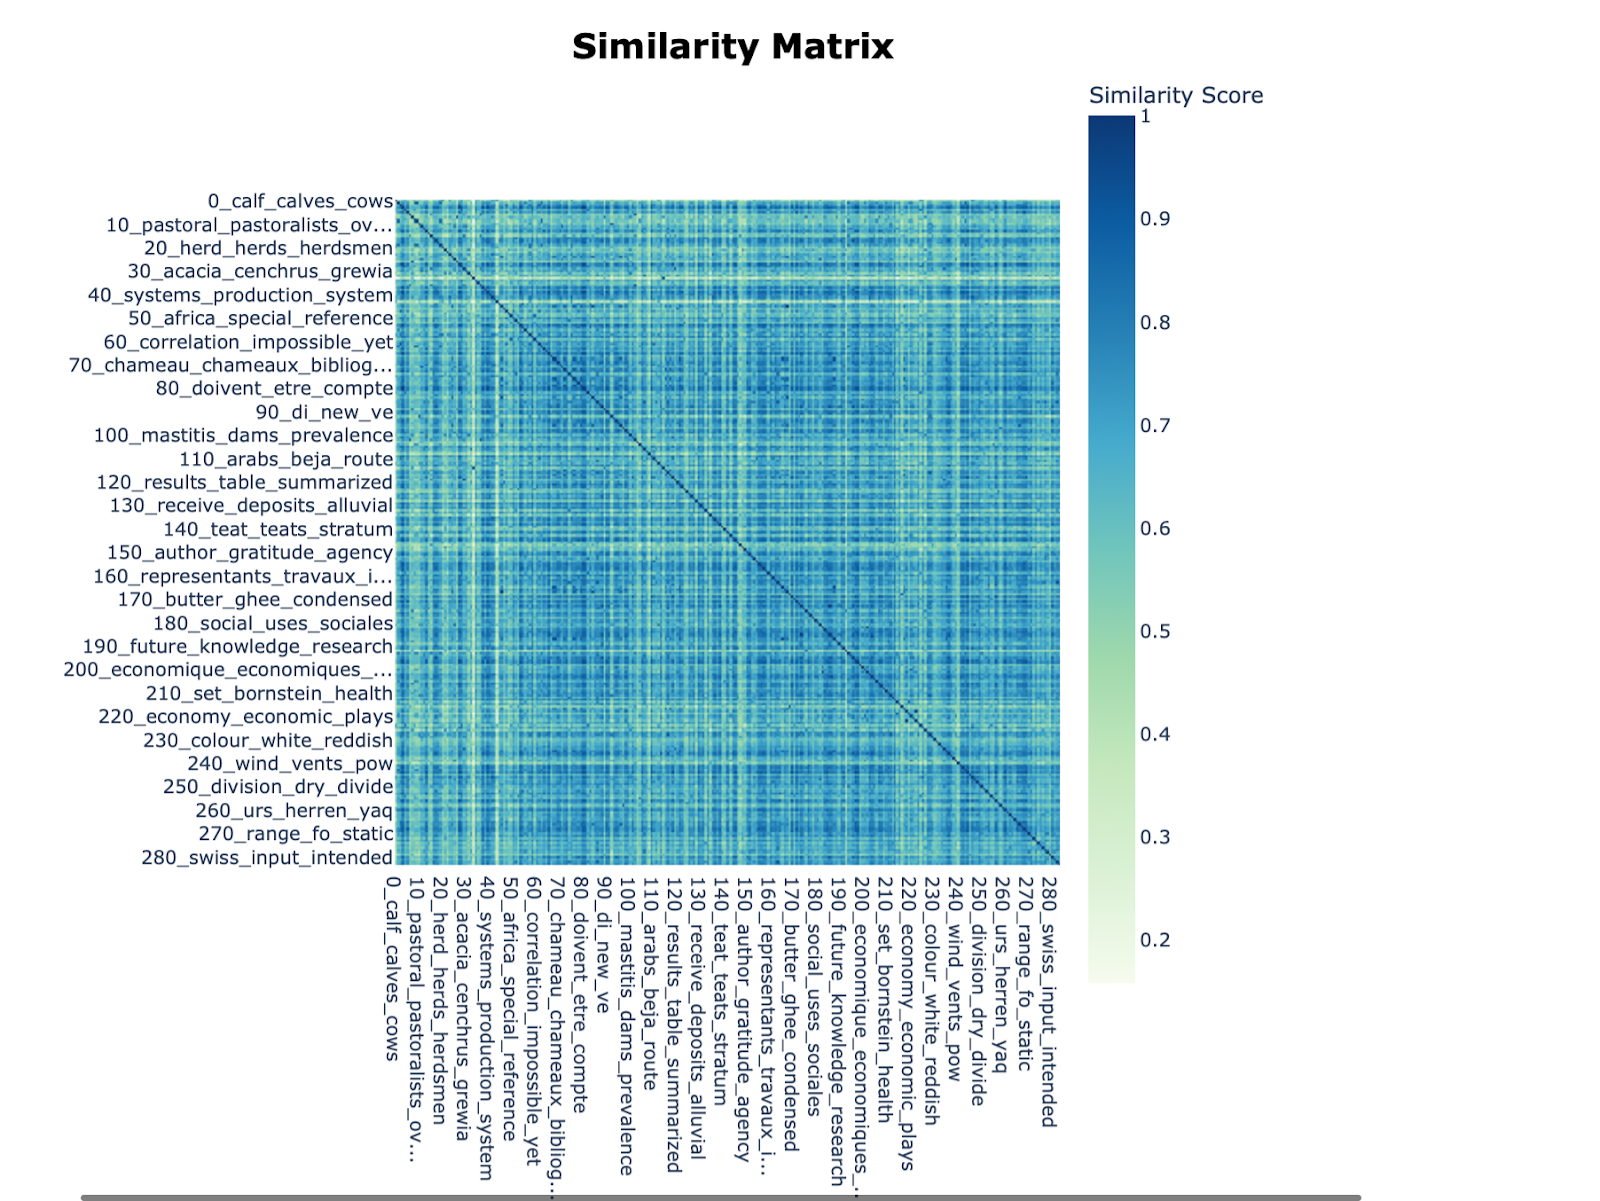 A similarity matrix visualized as a heatmap. The matrix displays the similarity scores between 280 topics, ranging from 0.3 to 1. The topics are listed on both the x and y axes. Warmer colors indicate higher similarity between topics.